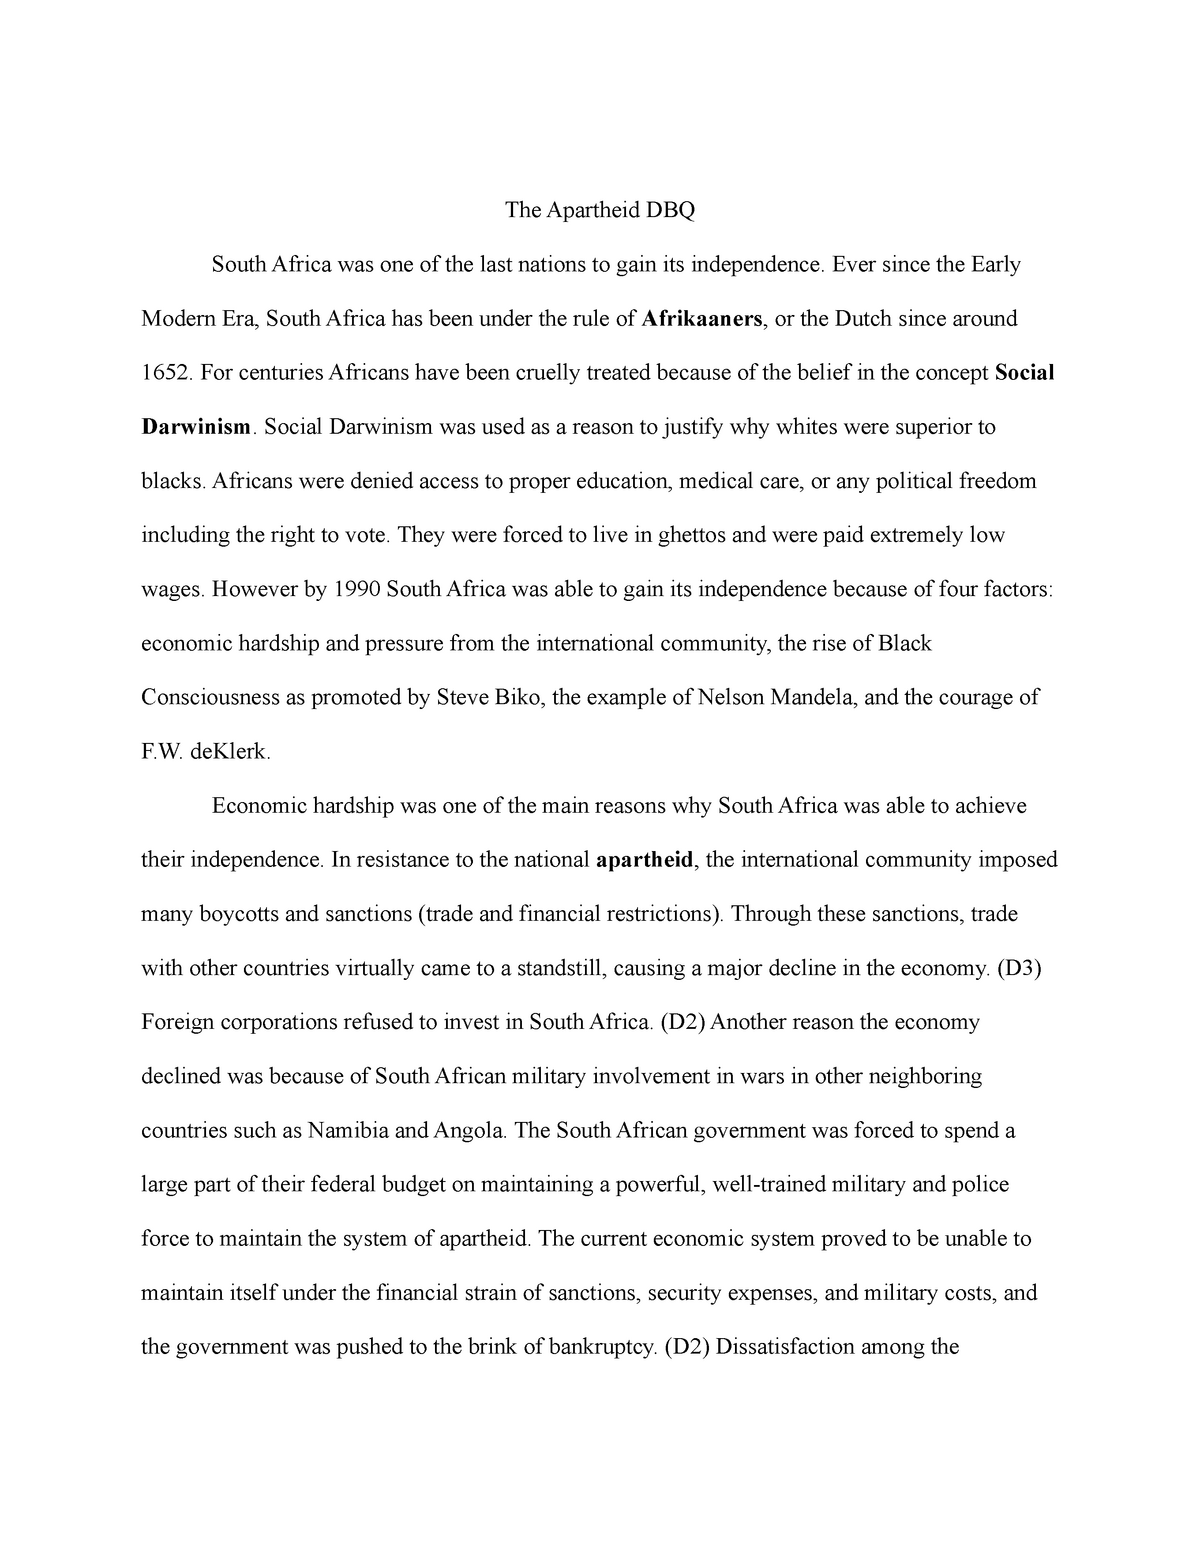 essay about apartheid in south africa 1940 to 1960